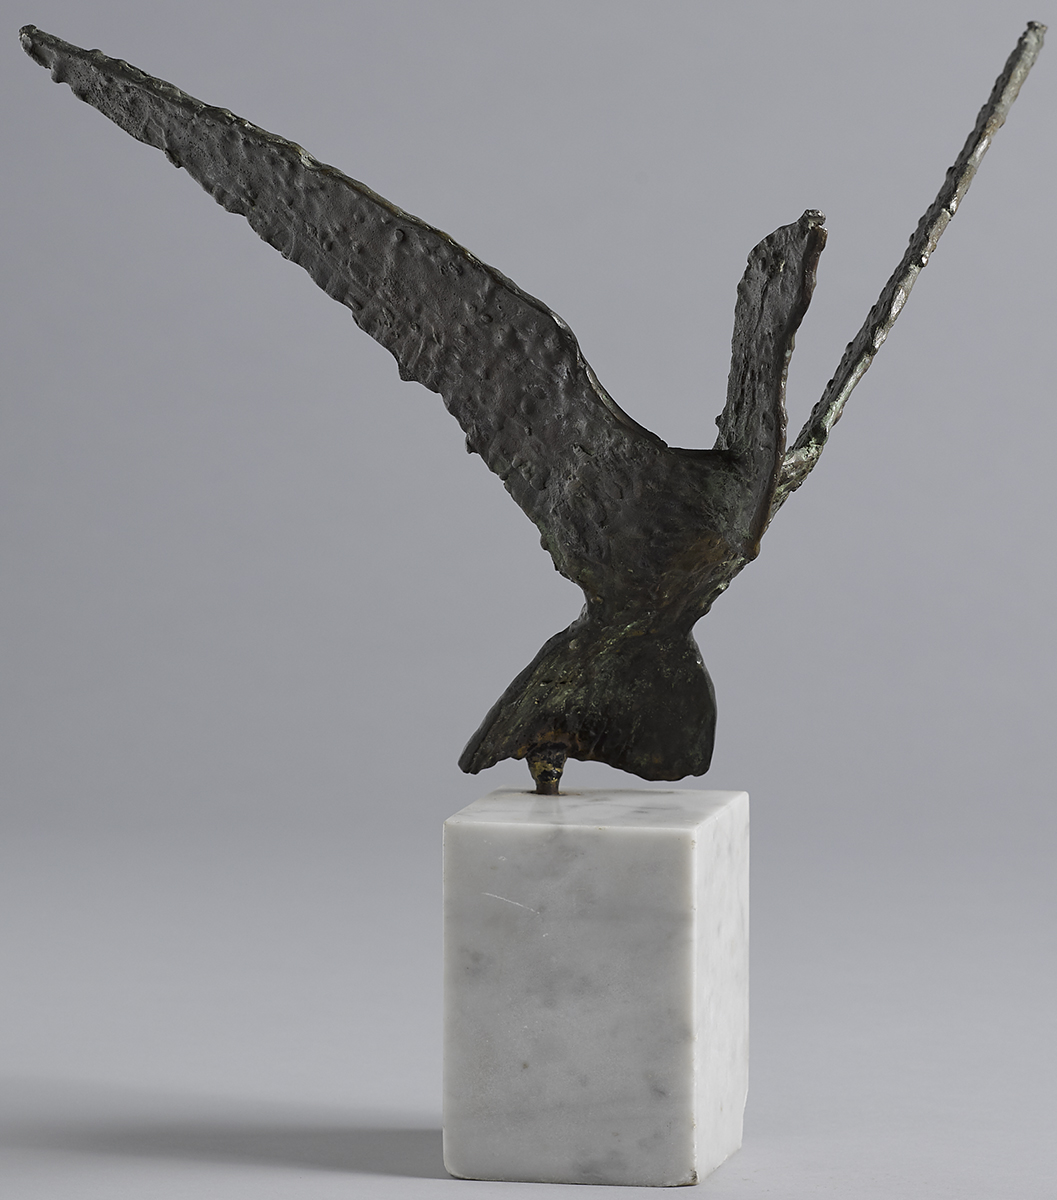 John Behan RHA (b.1938) BIRD, c.1975 bronze on white marble base; (no. 2 from an edition of 12) 12 - Image 2 of 2